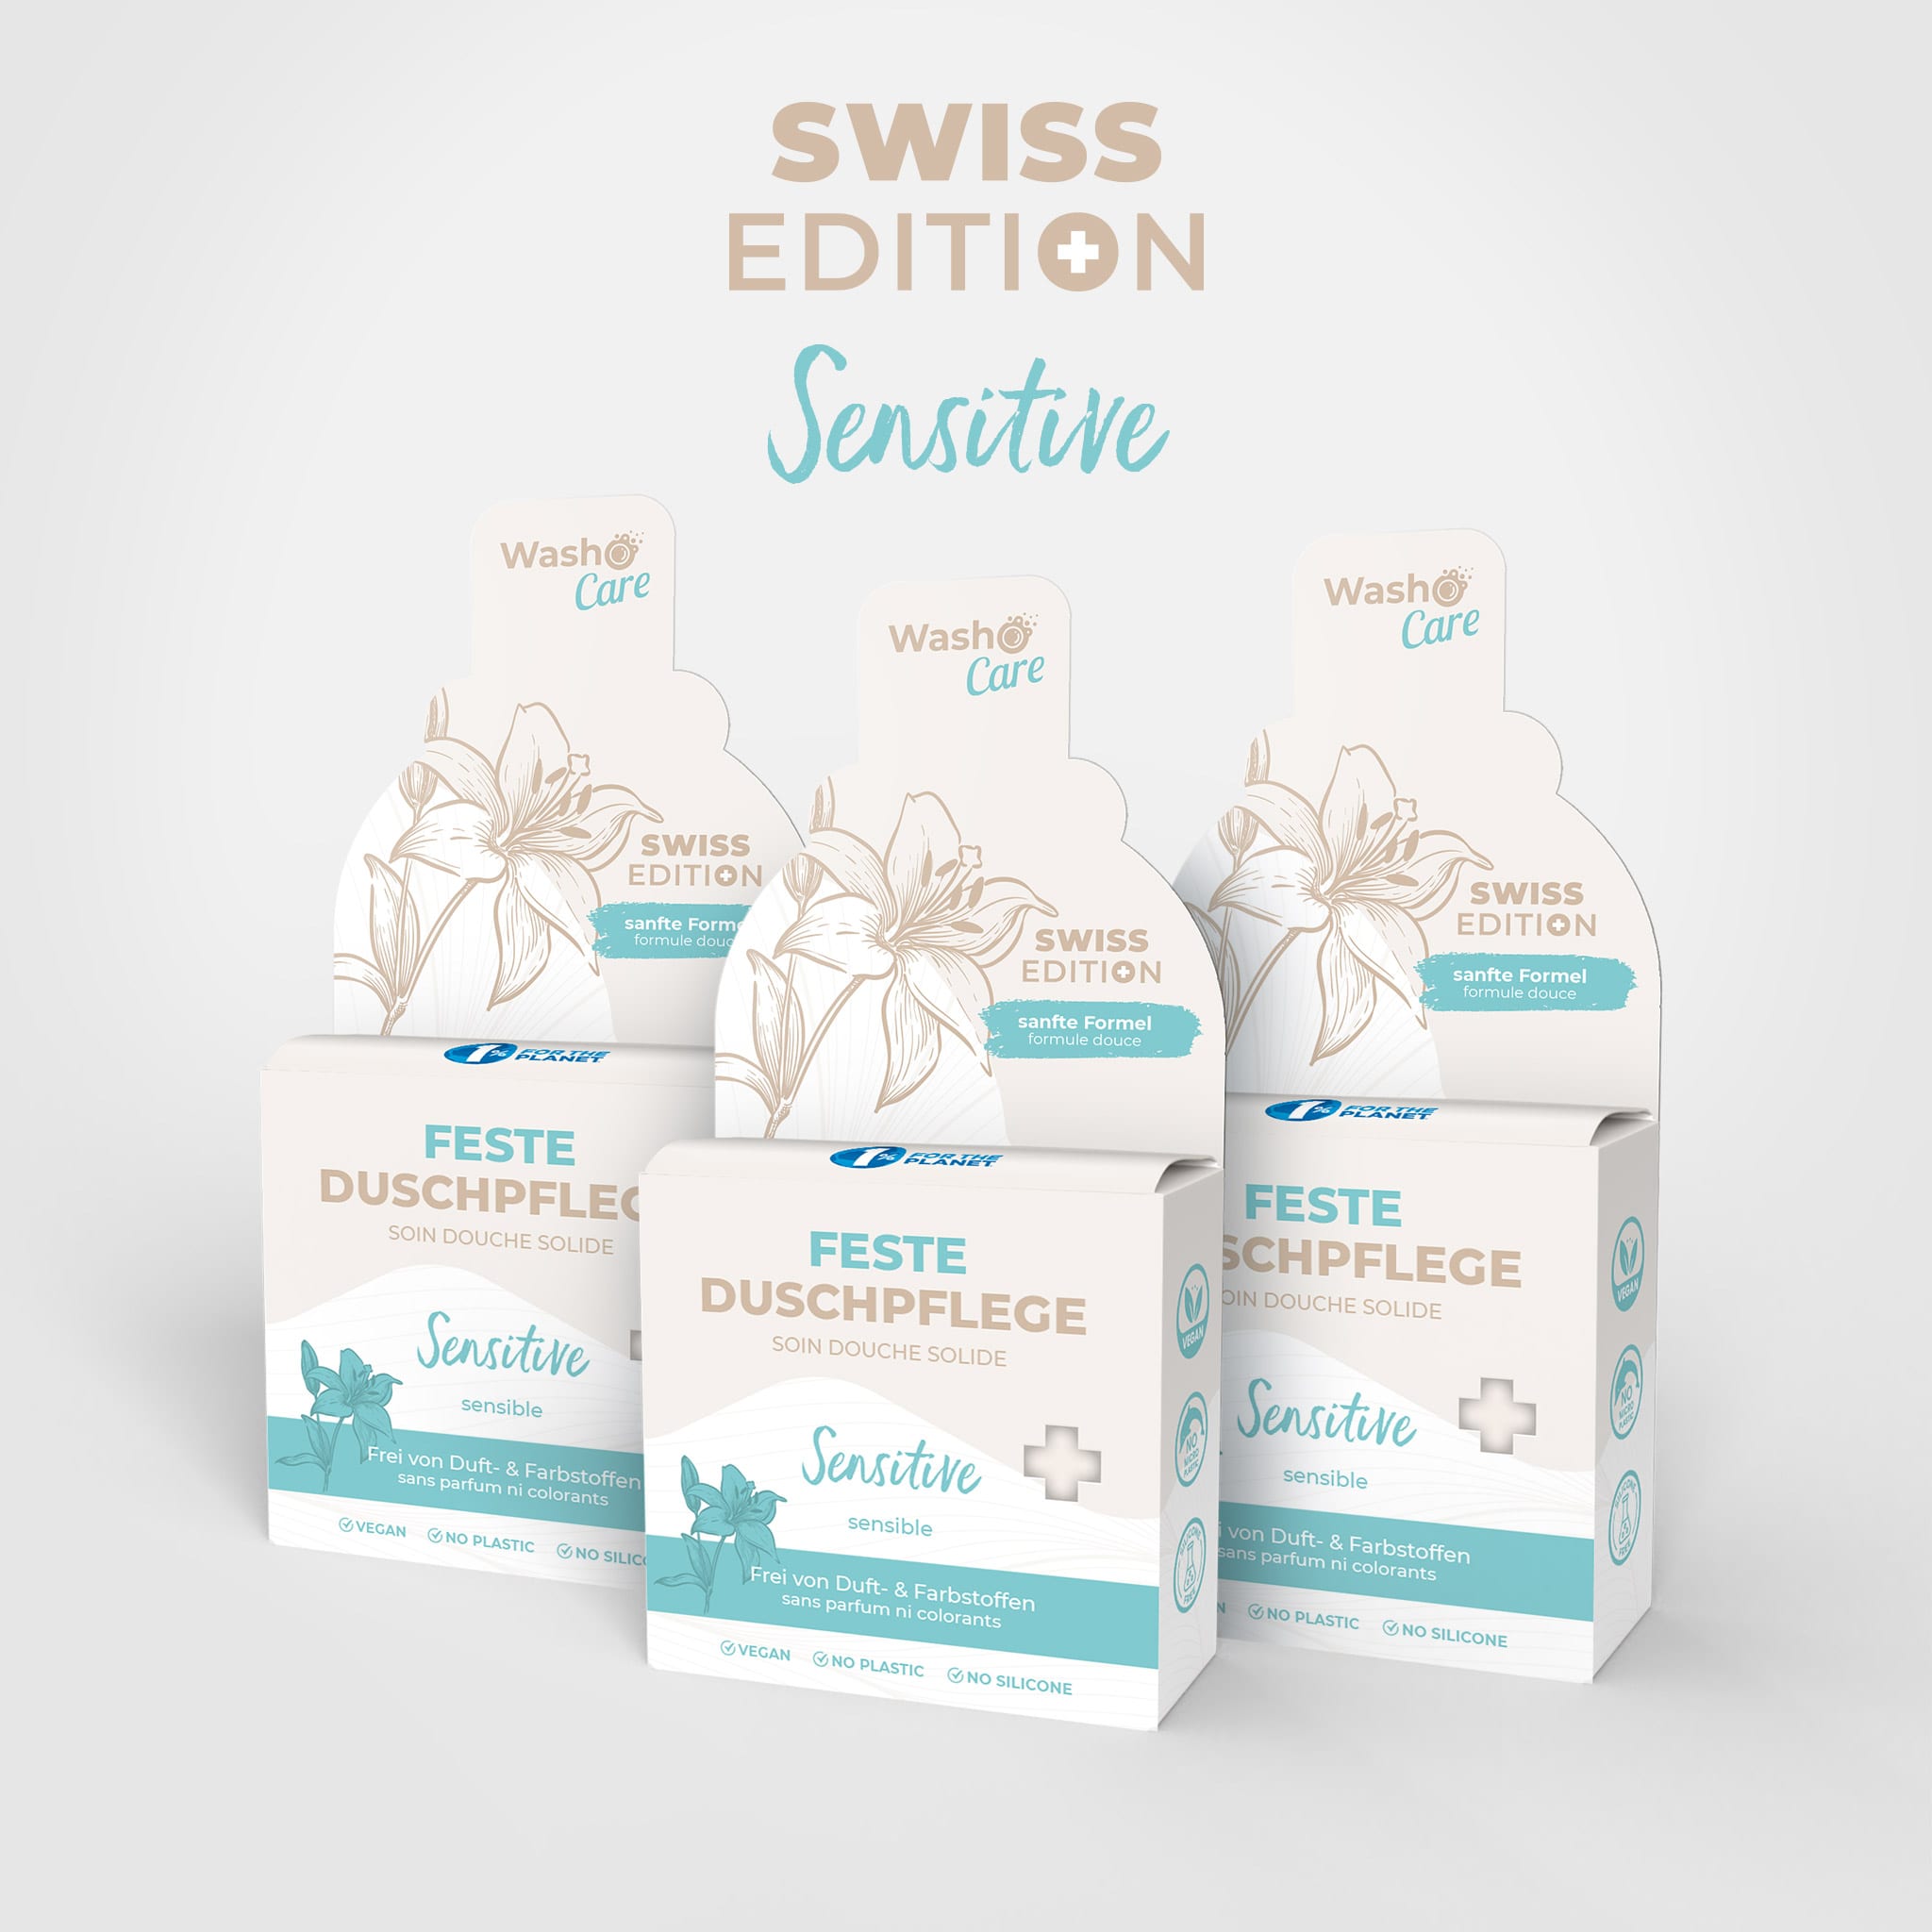 3 Washo Care Swiss Edition Solid Shower Care Sensitive